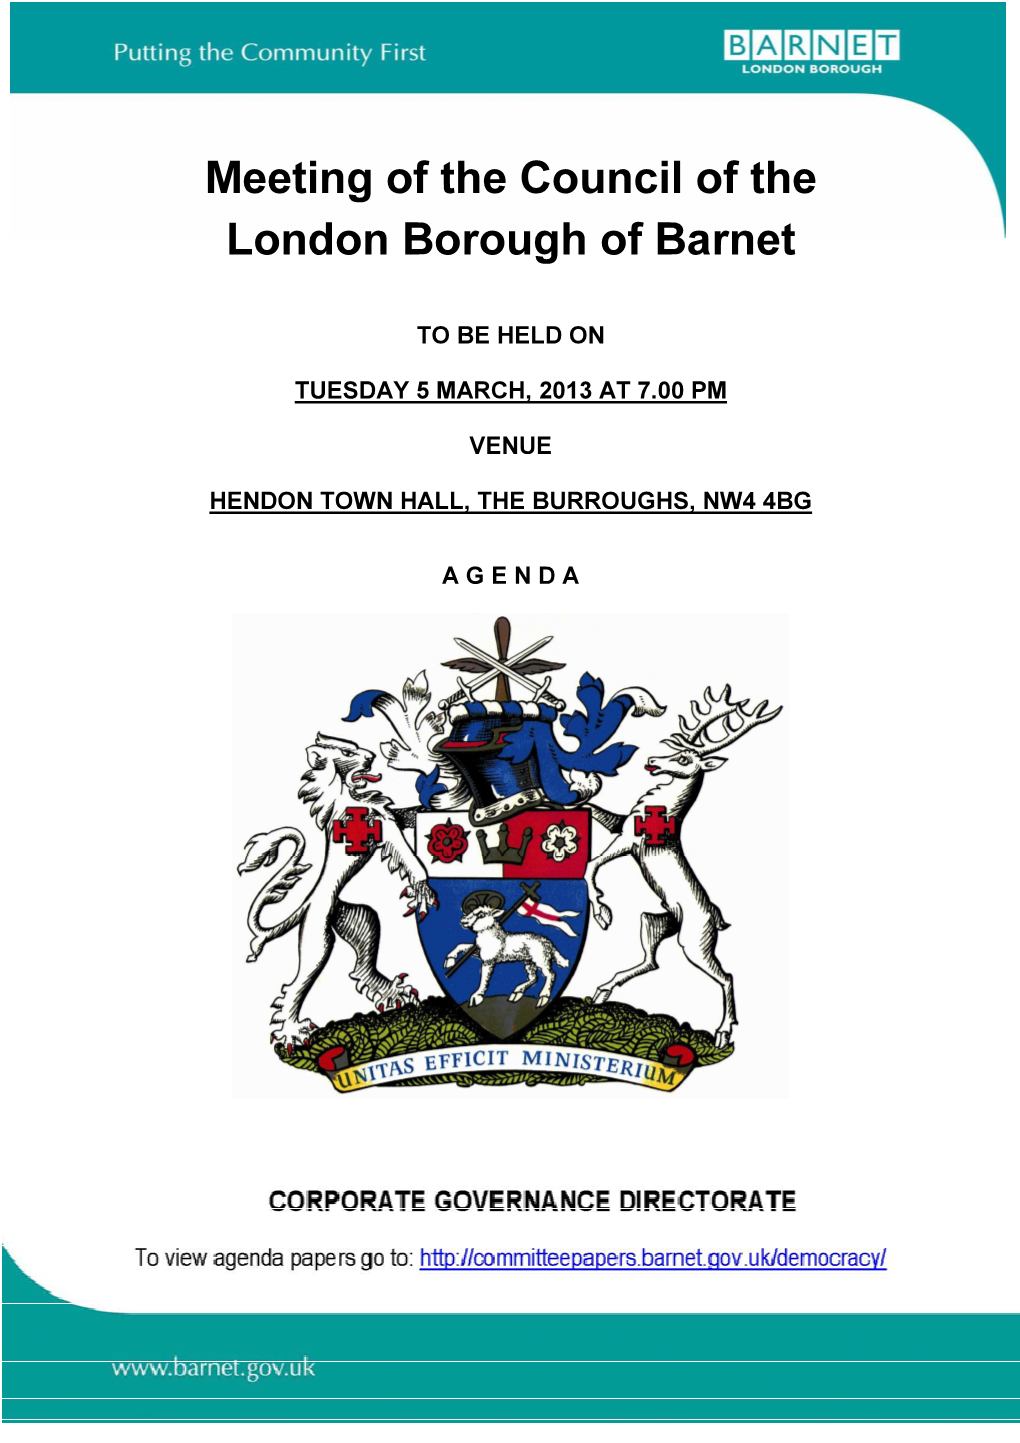 Meeting of the Council of the London Borough of Barnet